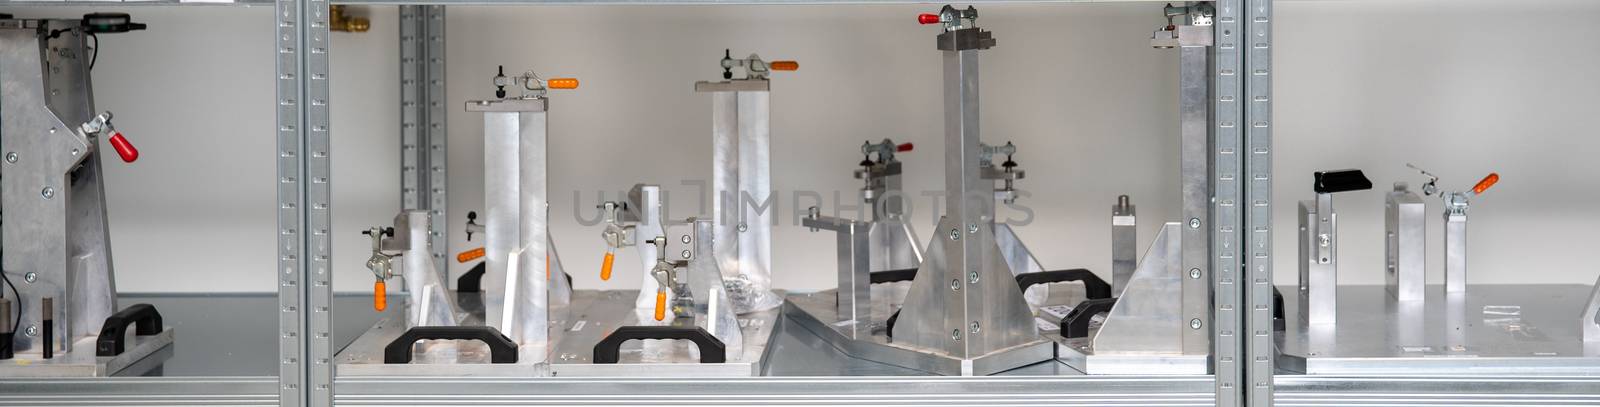 rack with tools for precise 3D measurement of plastic products for the automotive industry.